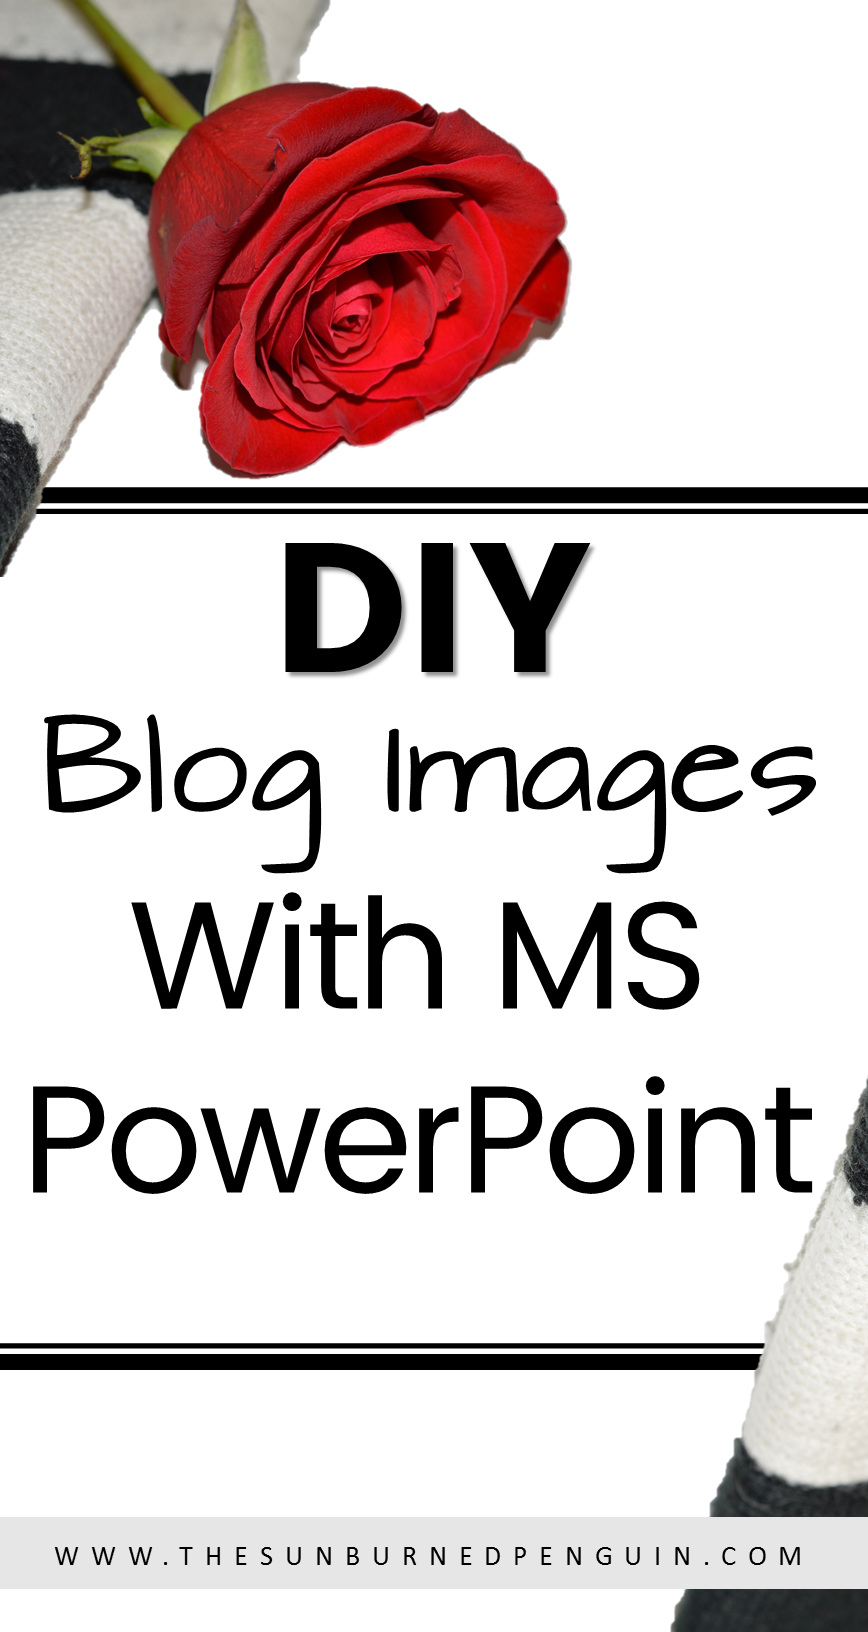 DIY Blog Images with MS PowerPoint